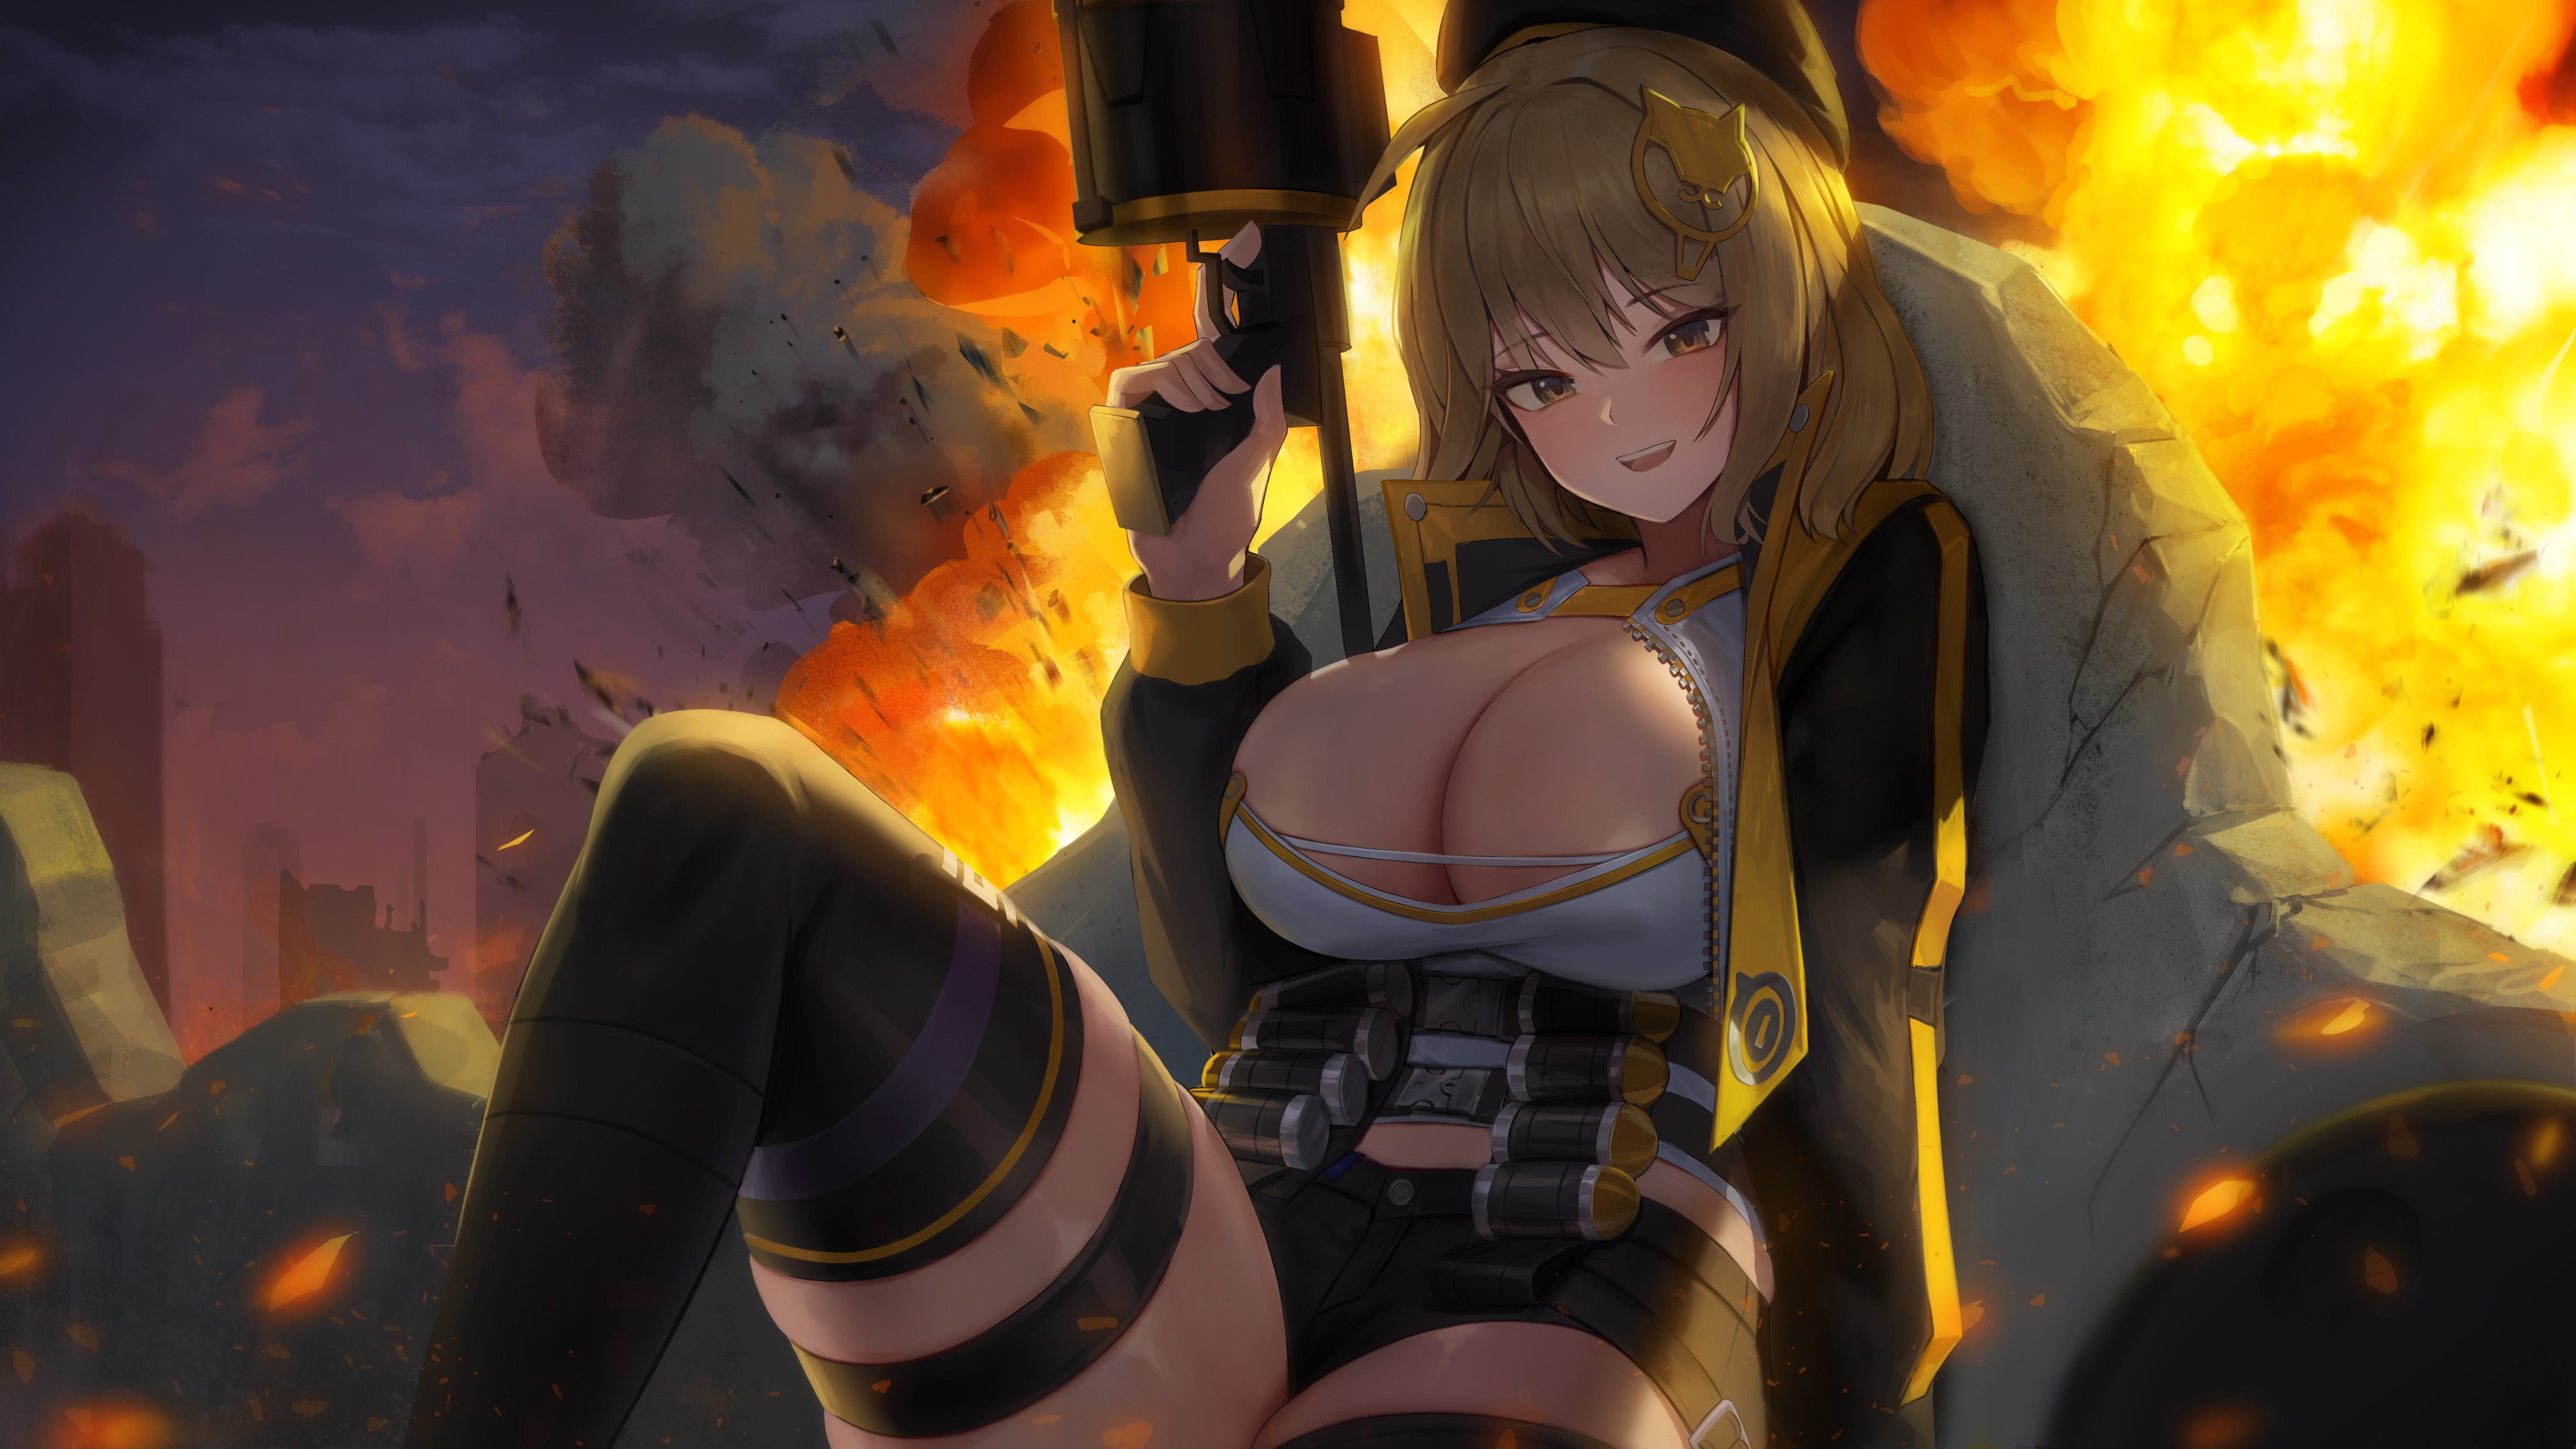 Anime 5760x3240 anime anime girls big boobs thighs blonde blushing explosion sitting open mouth happy thick thigh cleavage short shorts artwork ONEDOO